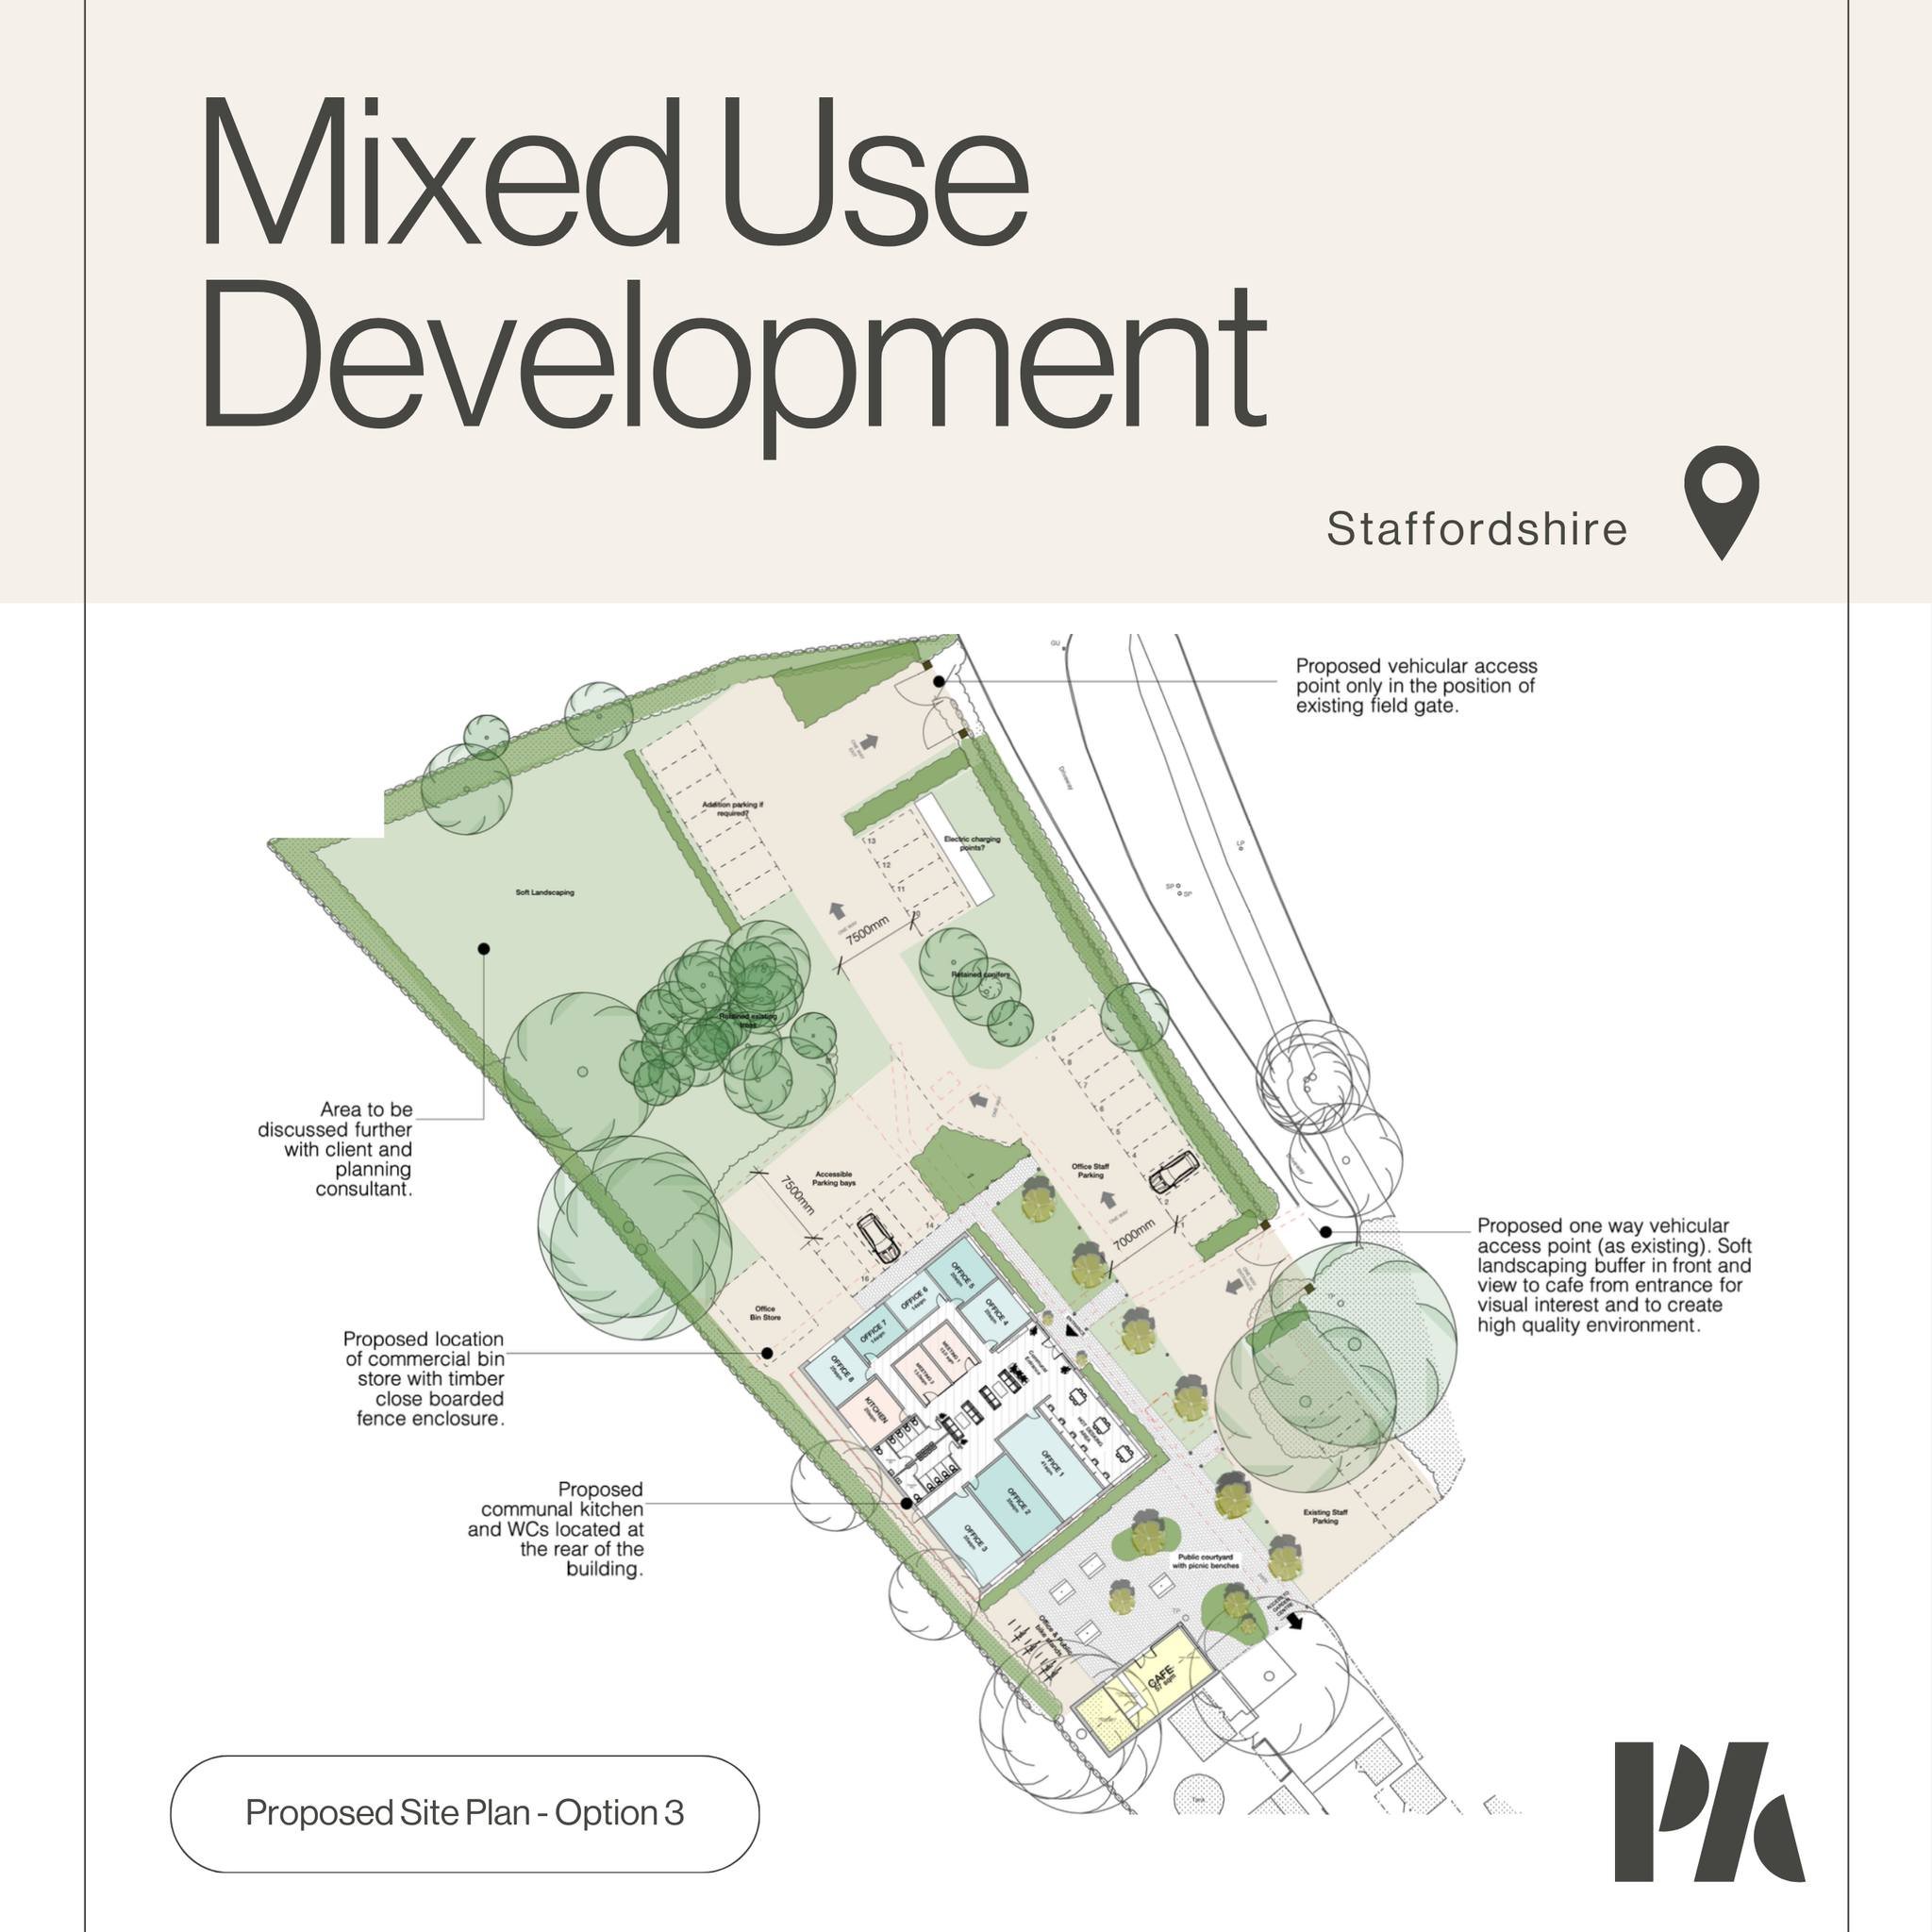 Here's another project that we are currently working on... the redevelopment of part of an existing garden centre into office / serviced offices complex with a small cafe onto a new public courtyard with some options also including some storage units